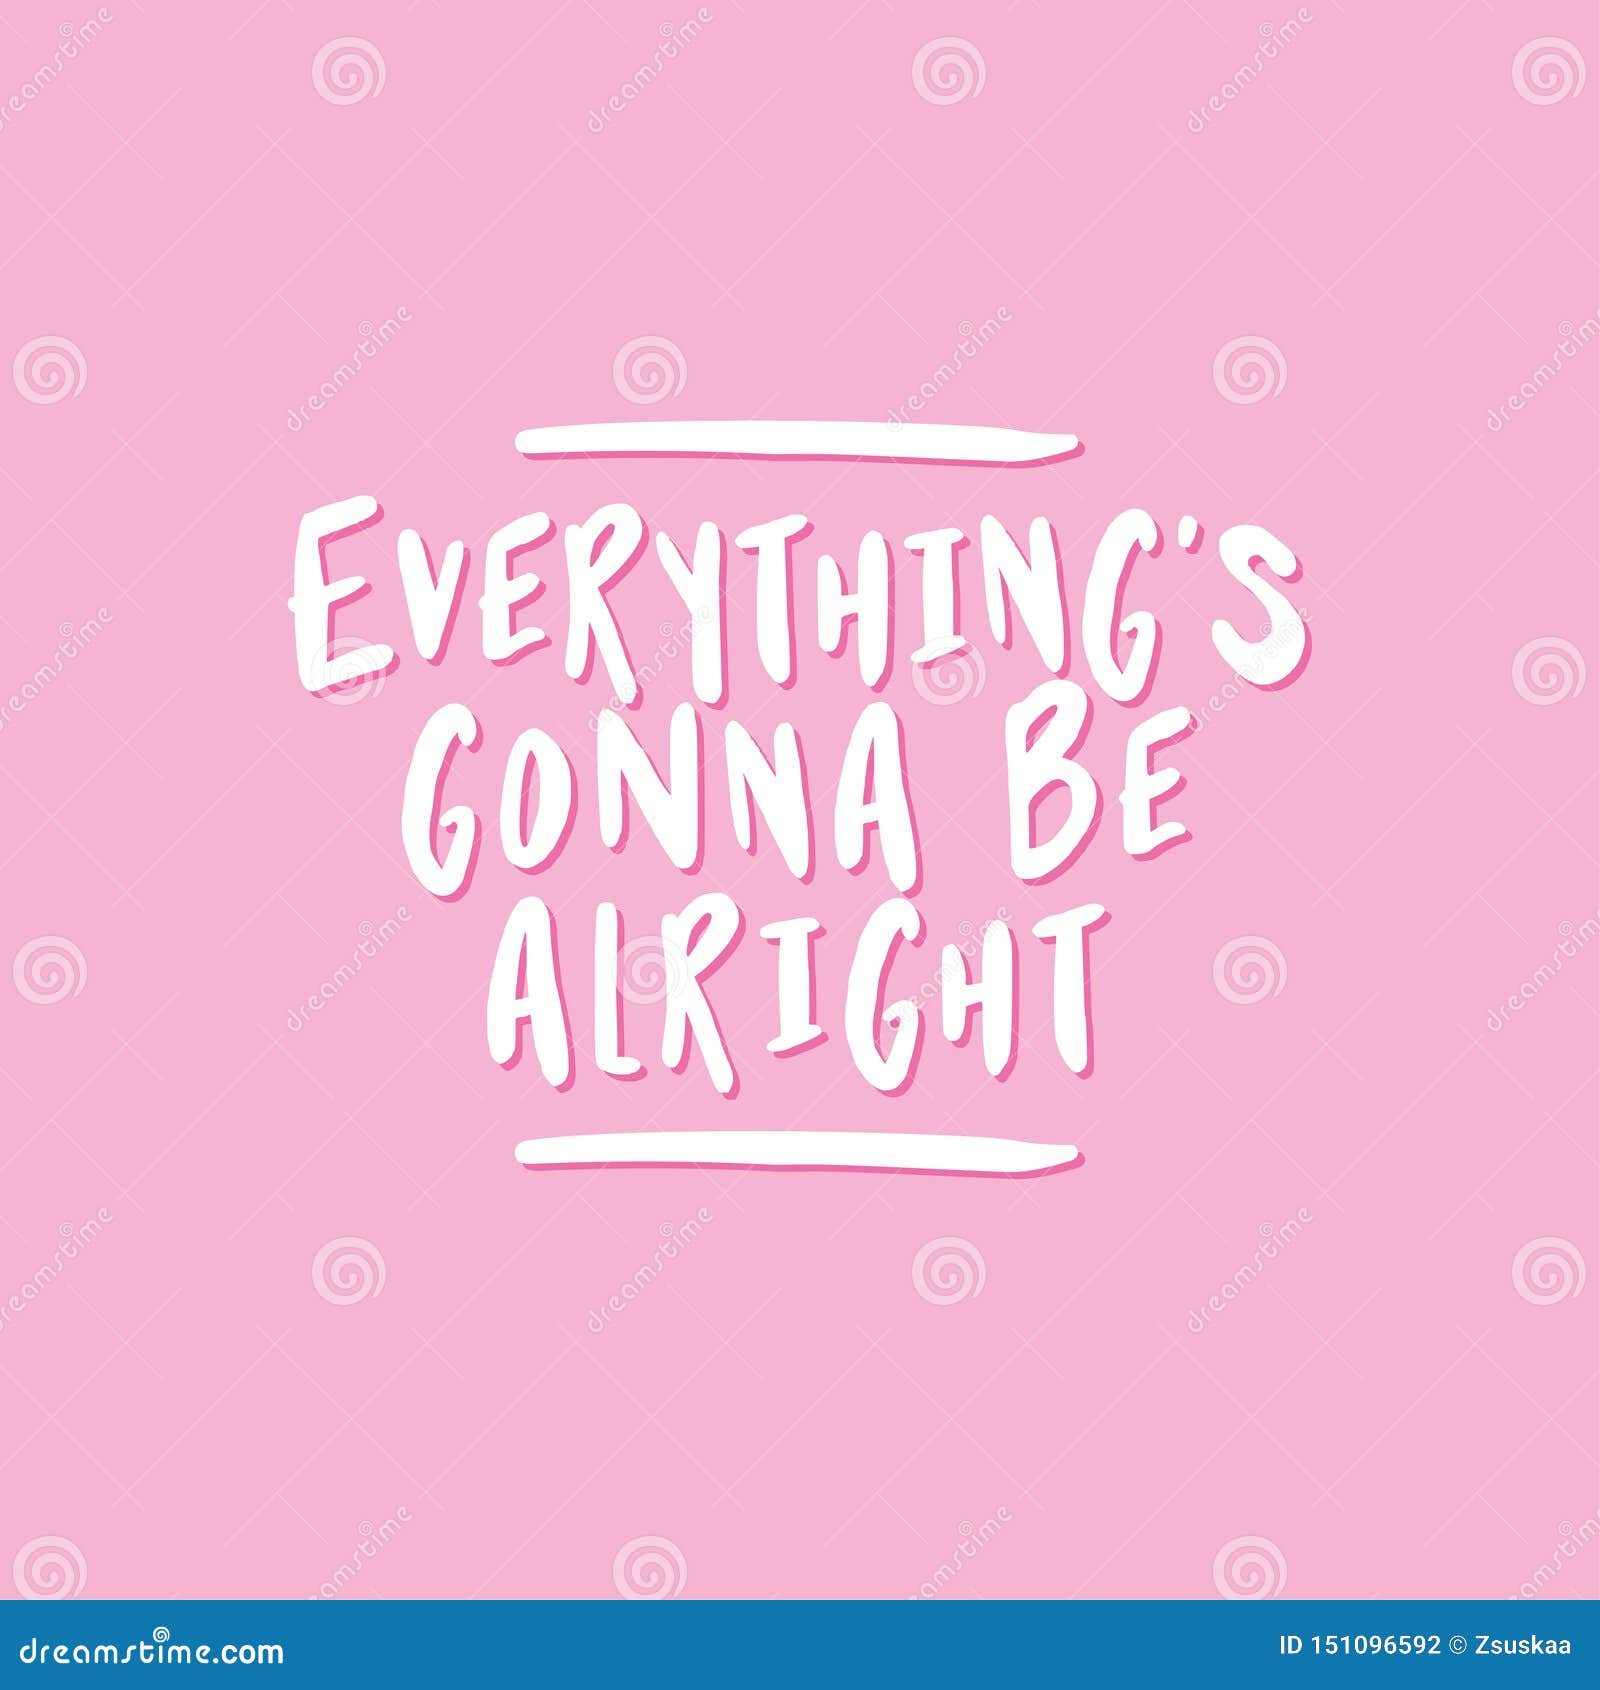 everything is gonna be alright.